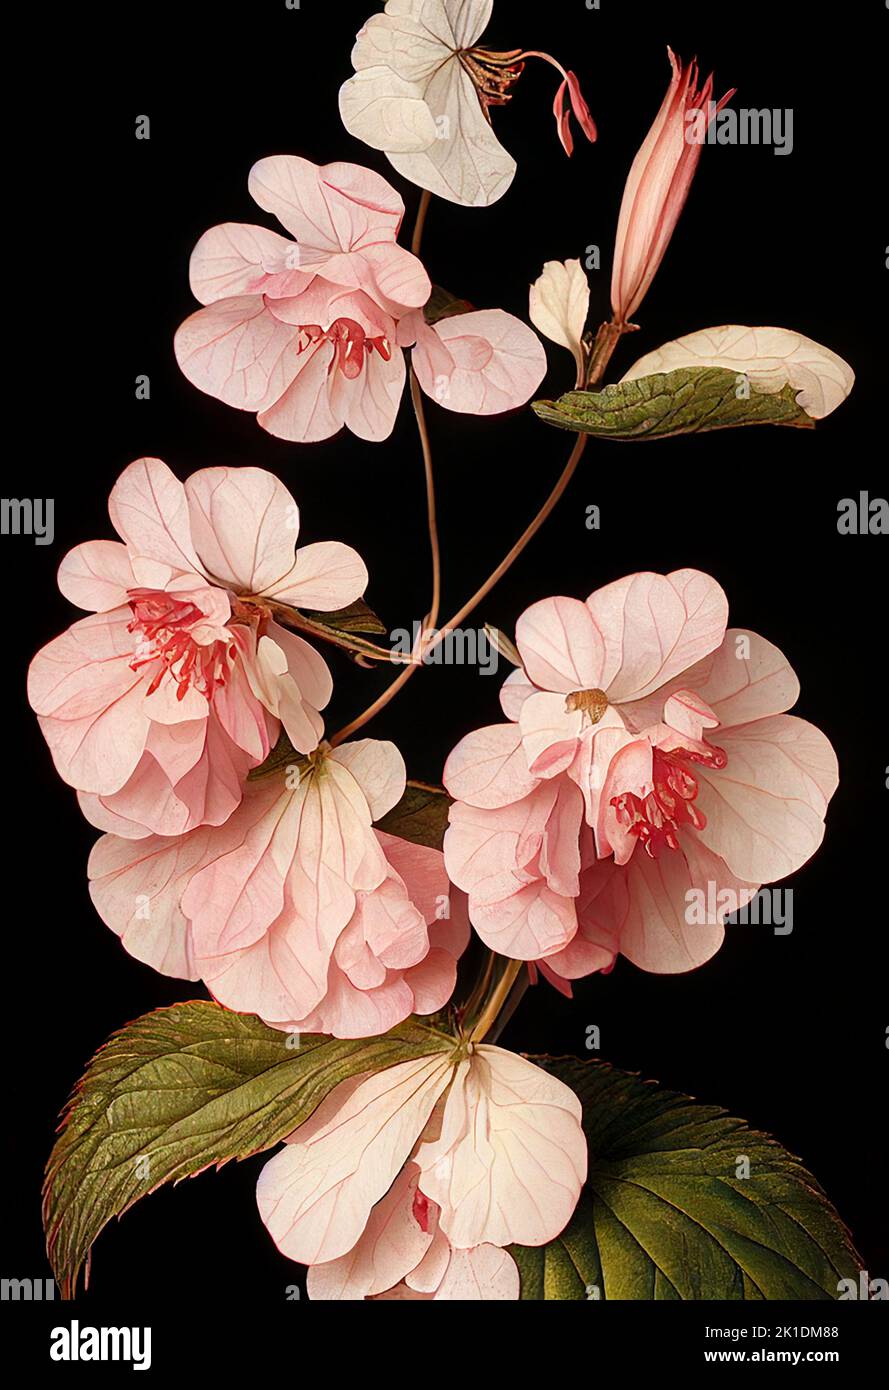 The beautiful blooms of the begonia flower, pink in color, on a black background. Artistic illustration. Stock Photo